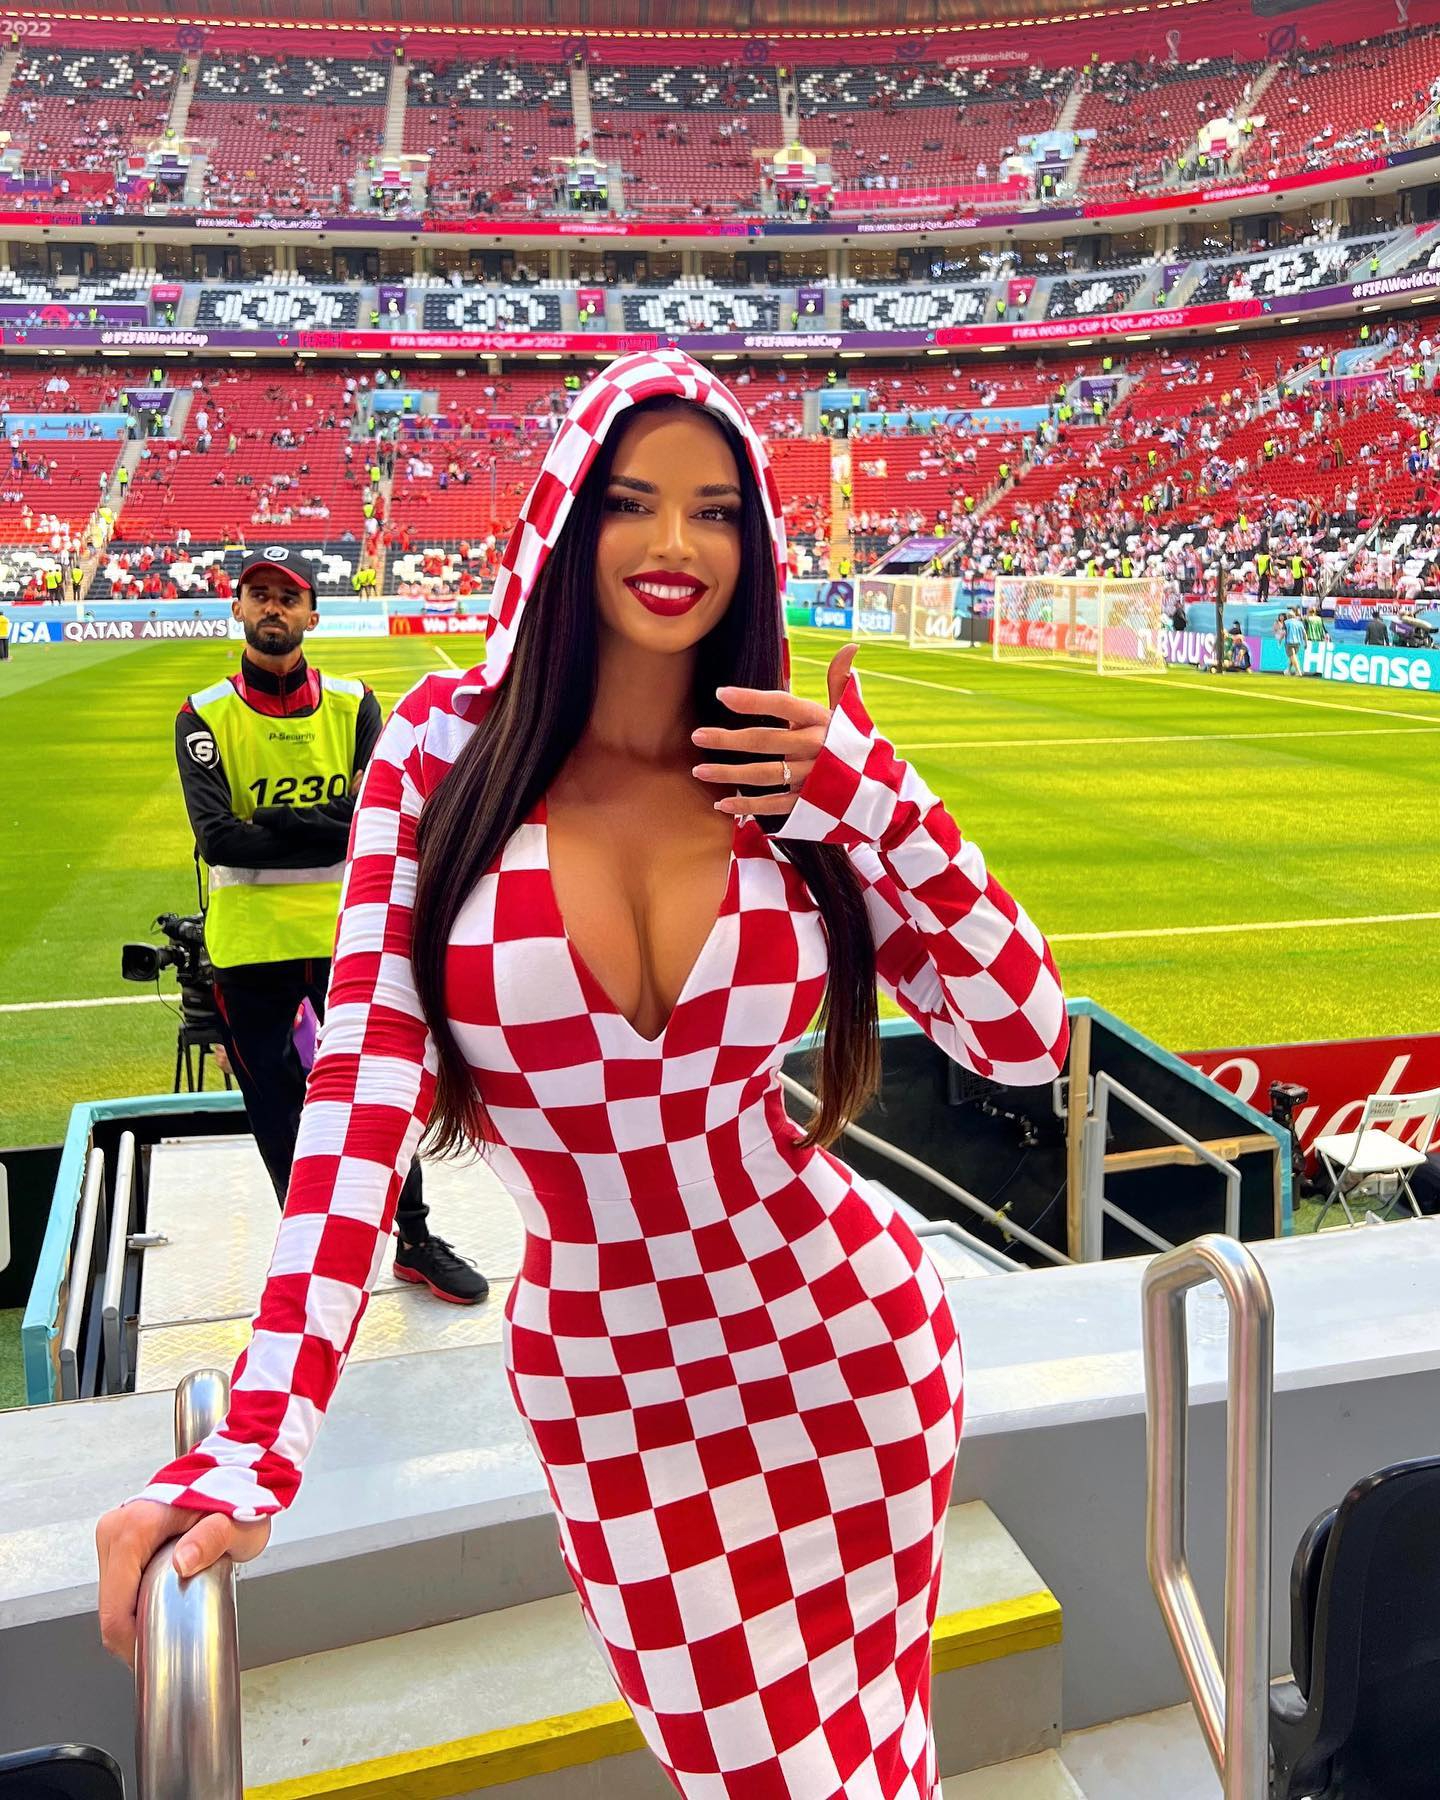 She'll be looking to cheer on Croatia once again this summer